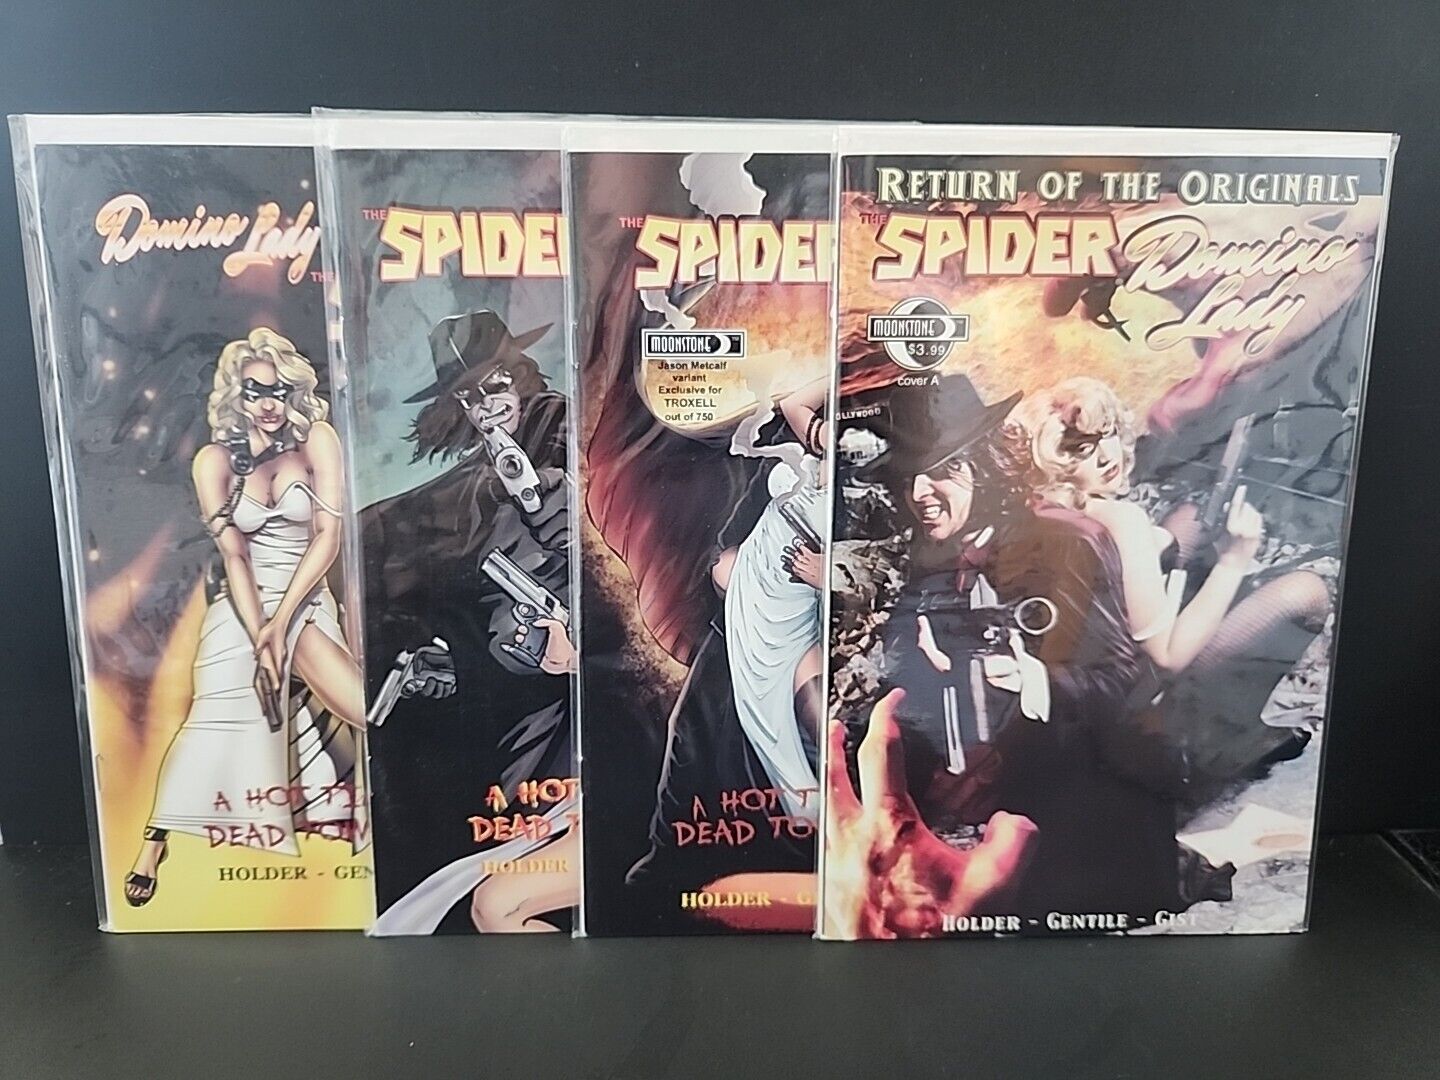 The Spider and Domino Lady Return of the Originals + 3 Variants